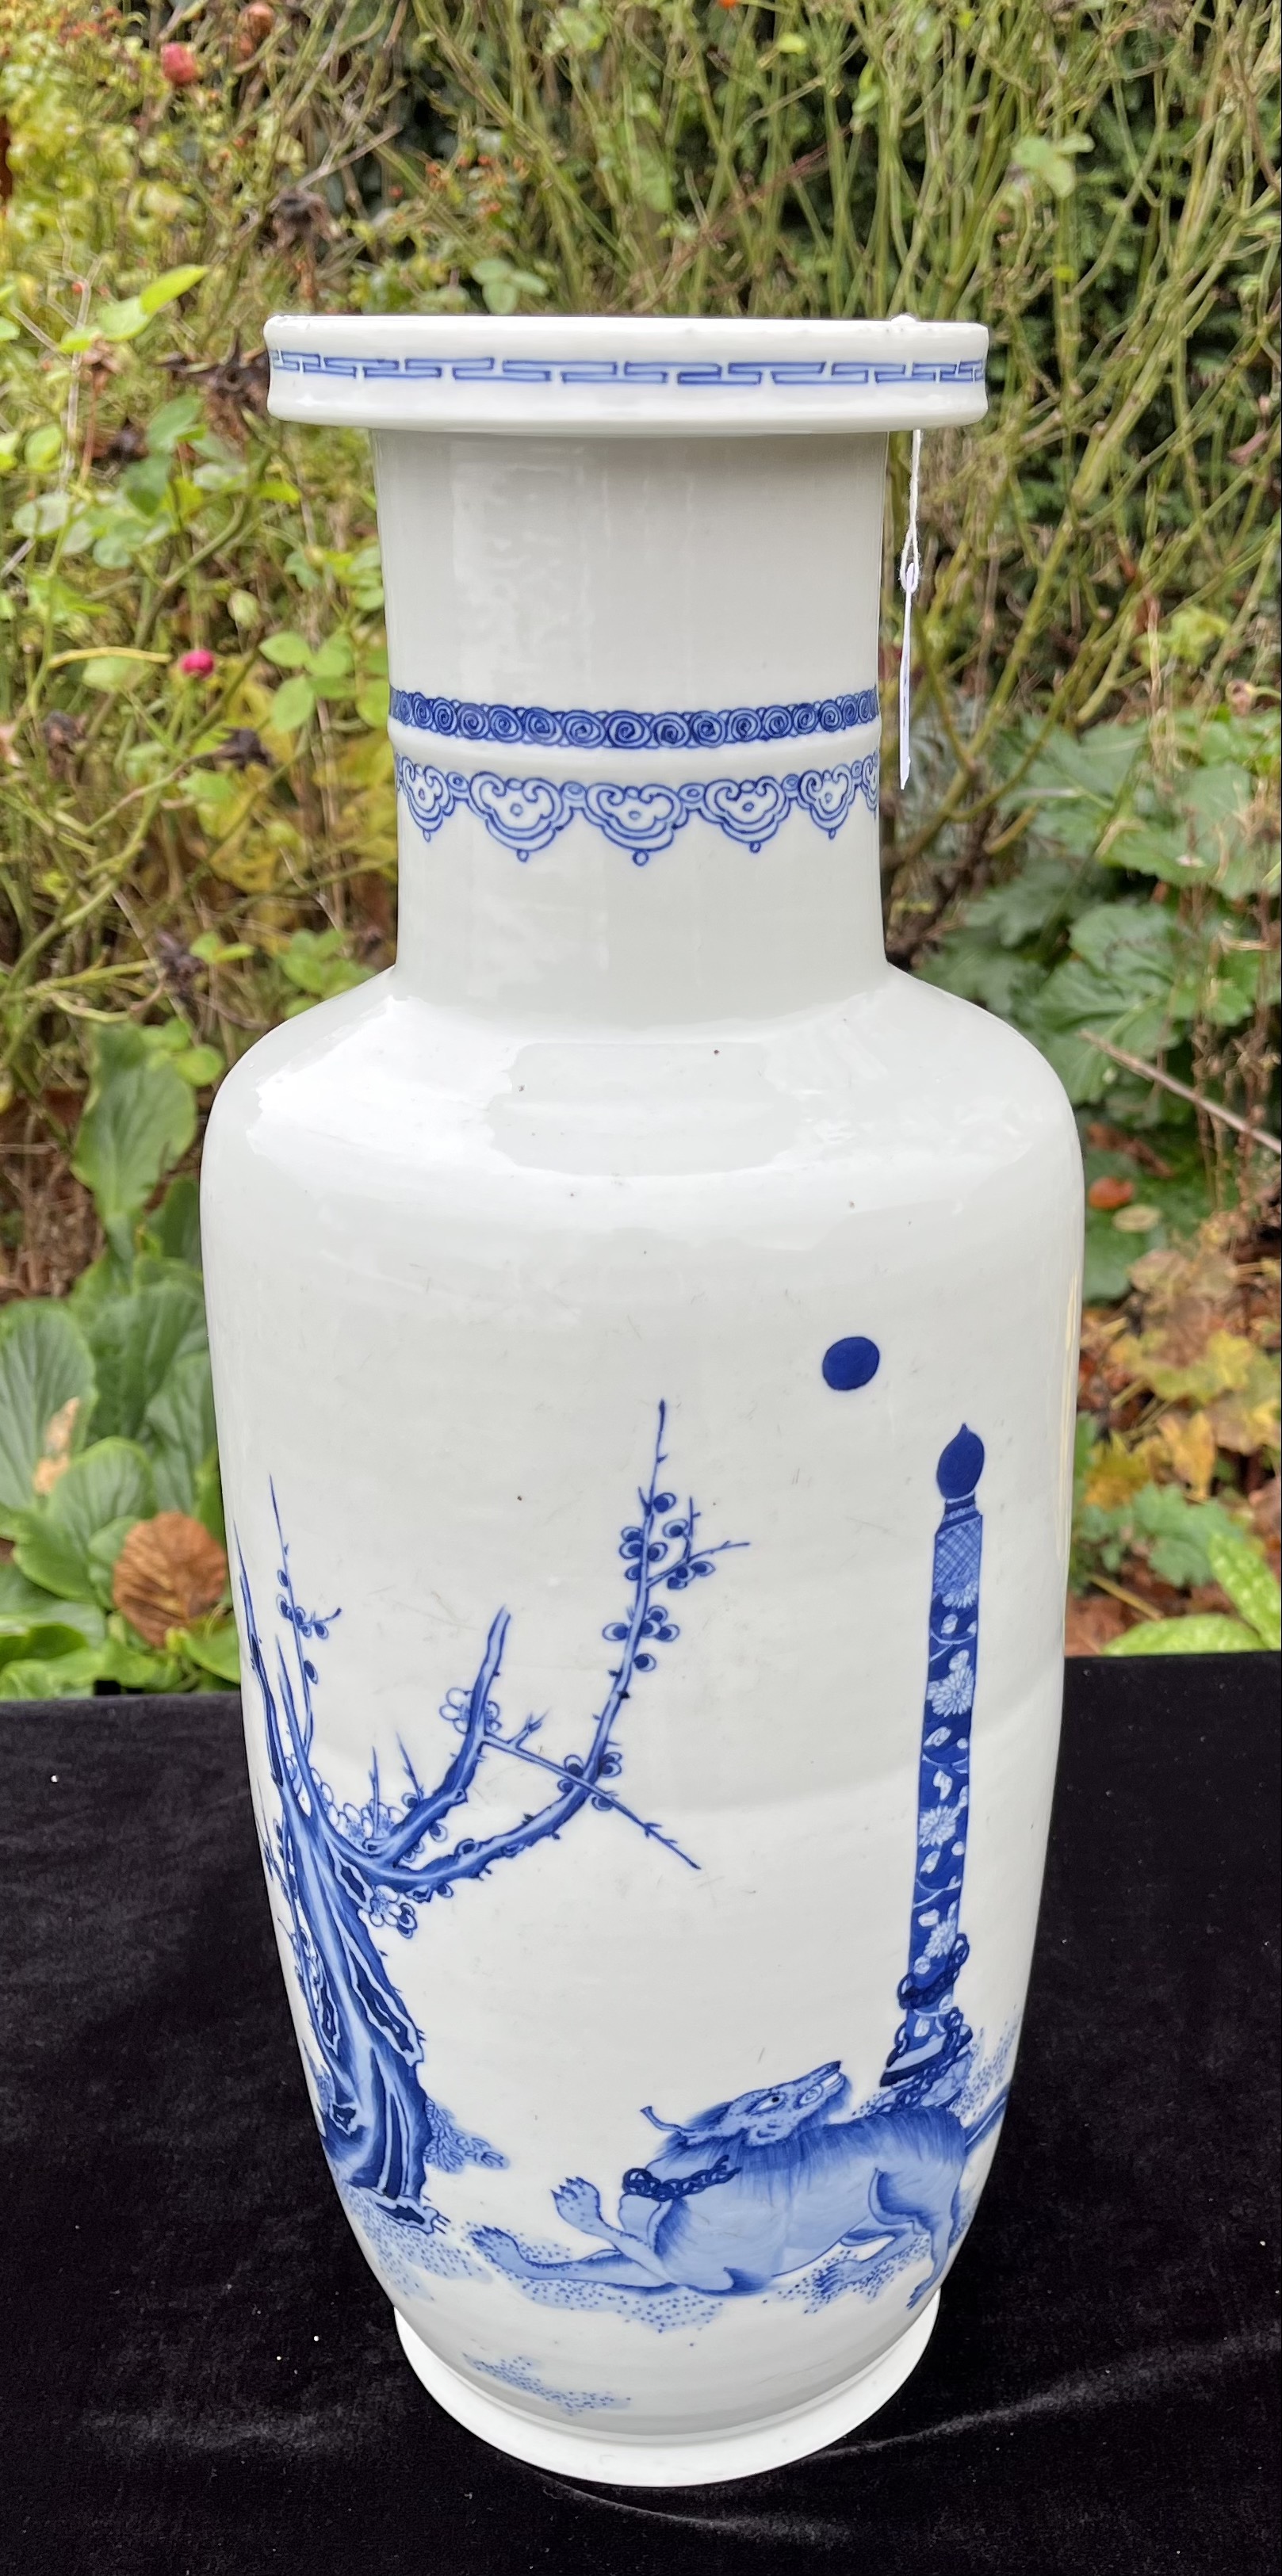 A CHINESE BLUE AND WHITE PORCELAIN ROULEAU VASE, QING DYNASTY, 19TH CENTURY - Image 5 of 20